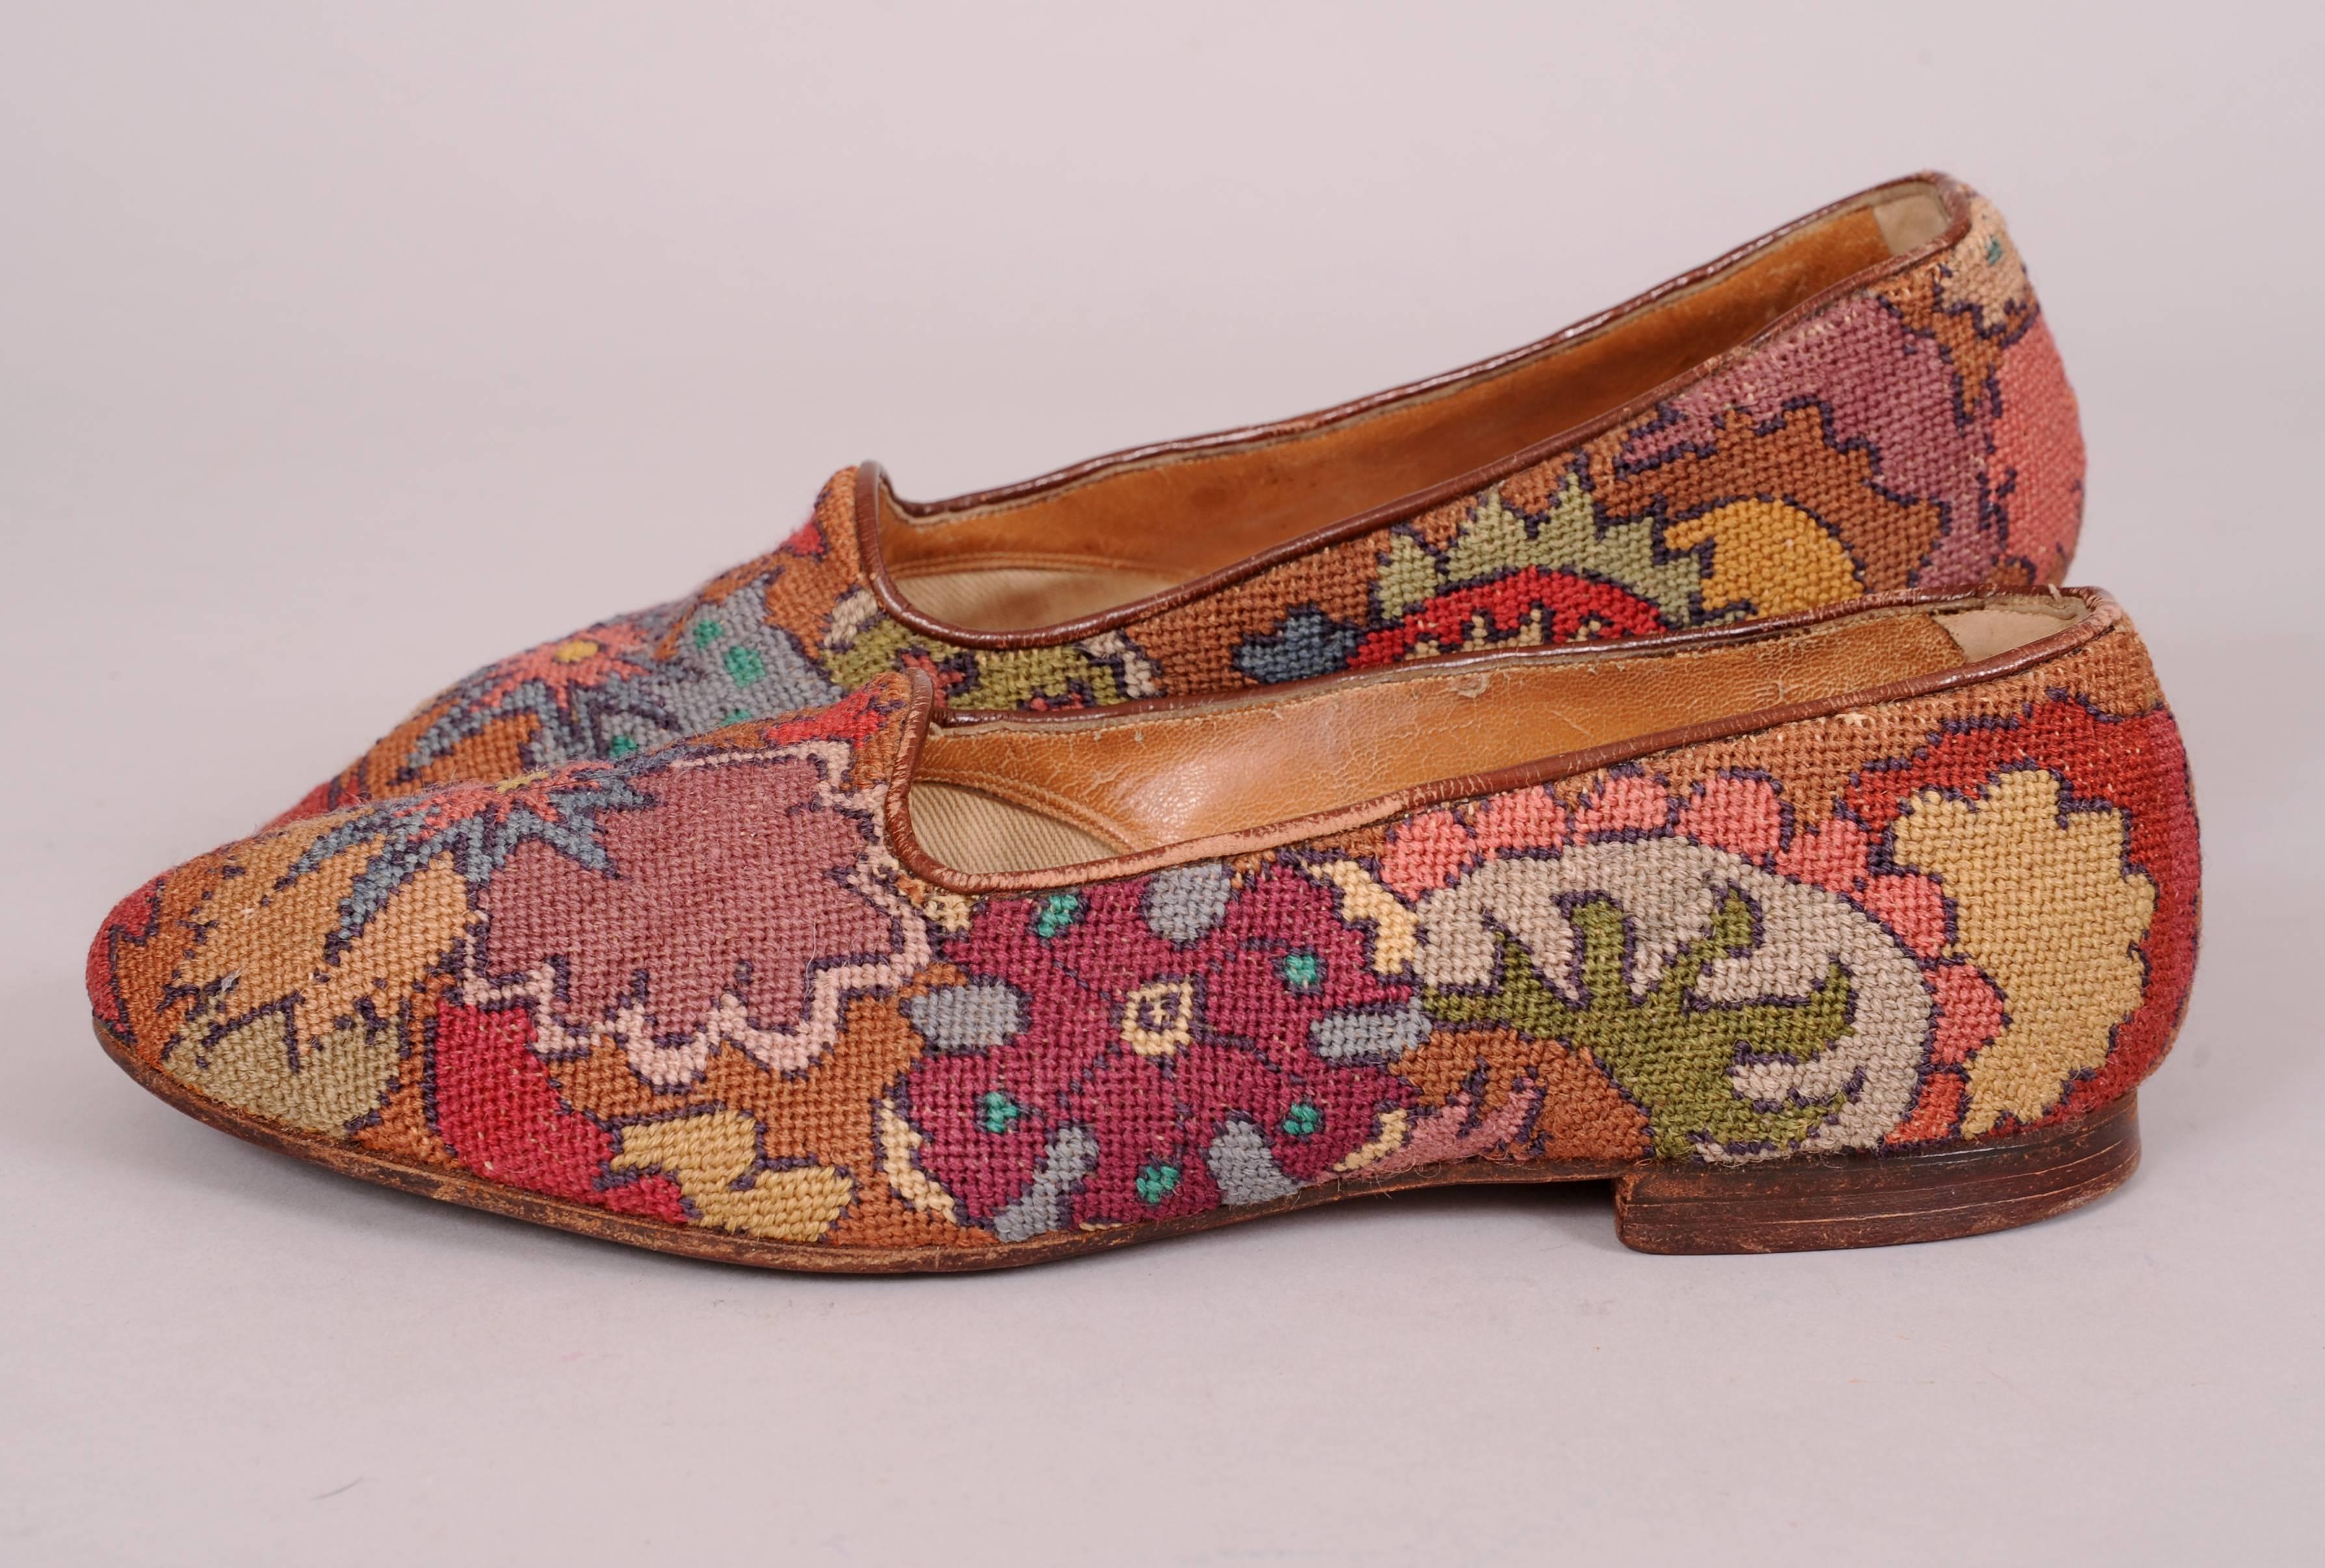 A fabulous design in a multitude of colors makes these leather and hand done needlepoint slippers a standout. Hand stitched in shades of blue, brown, green, red, grey camel and rose they are just so chic. The interior label is illegible and they are